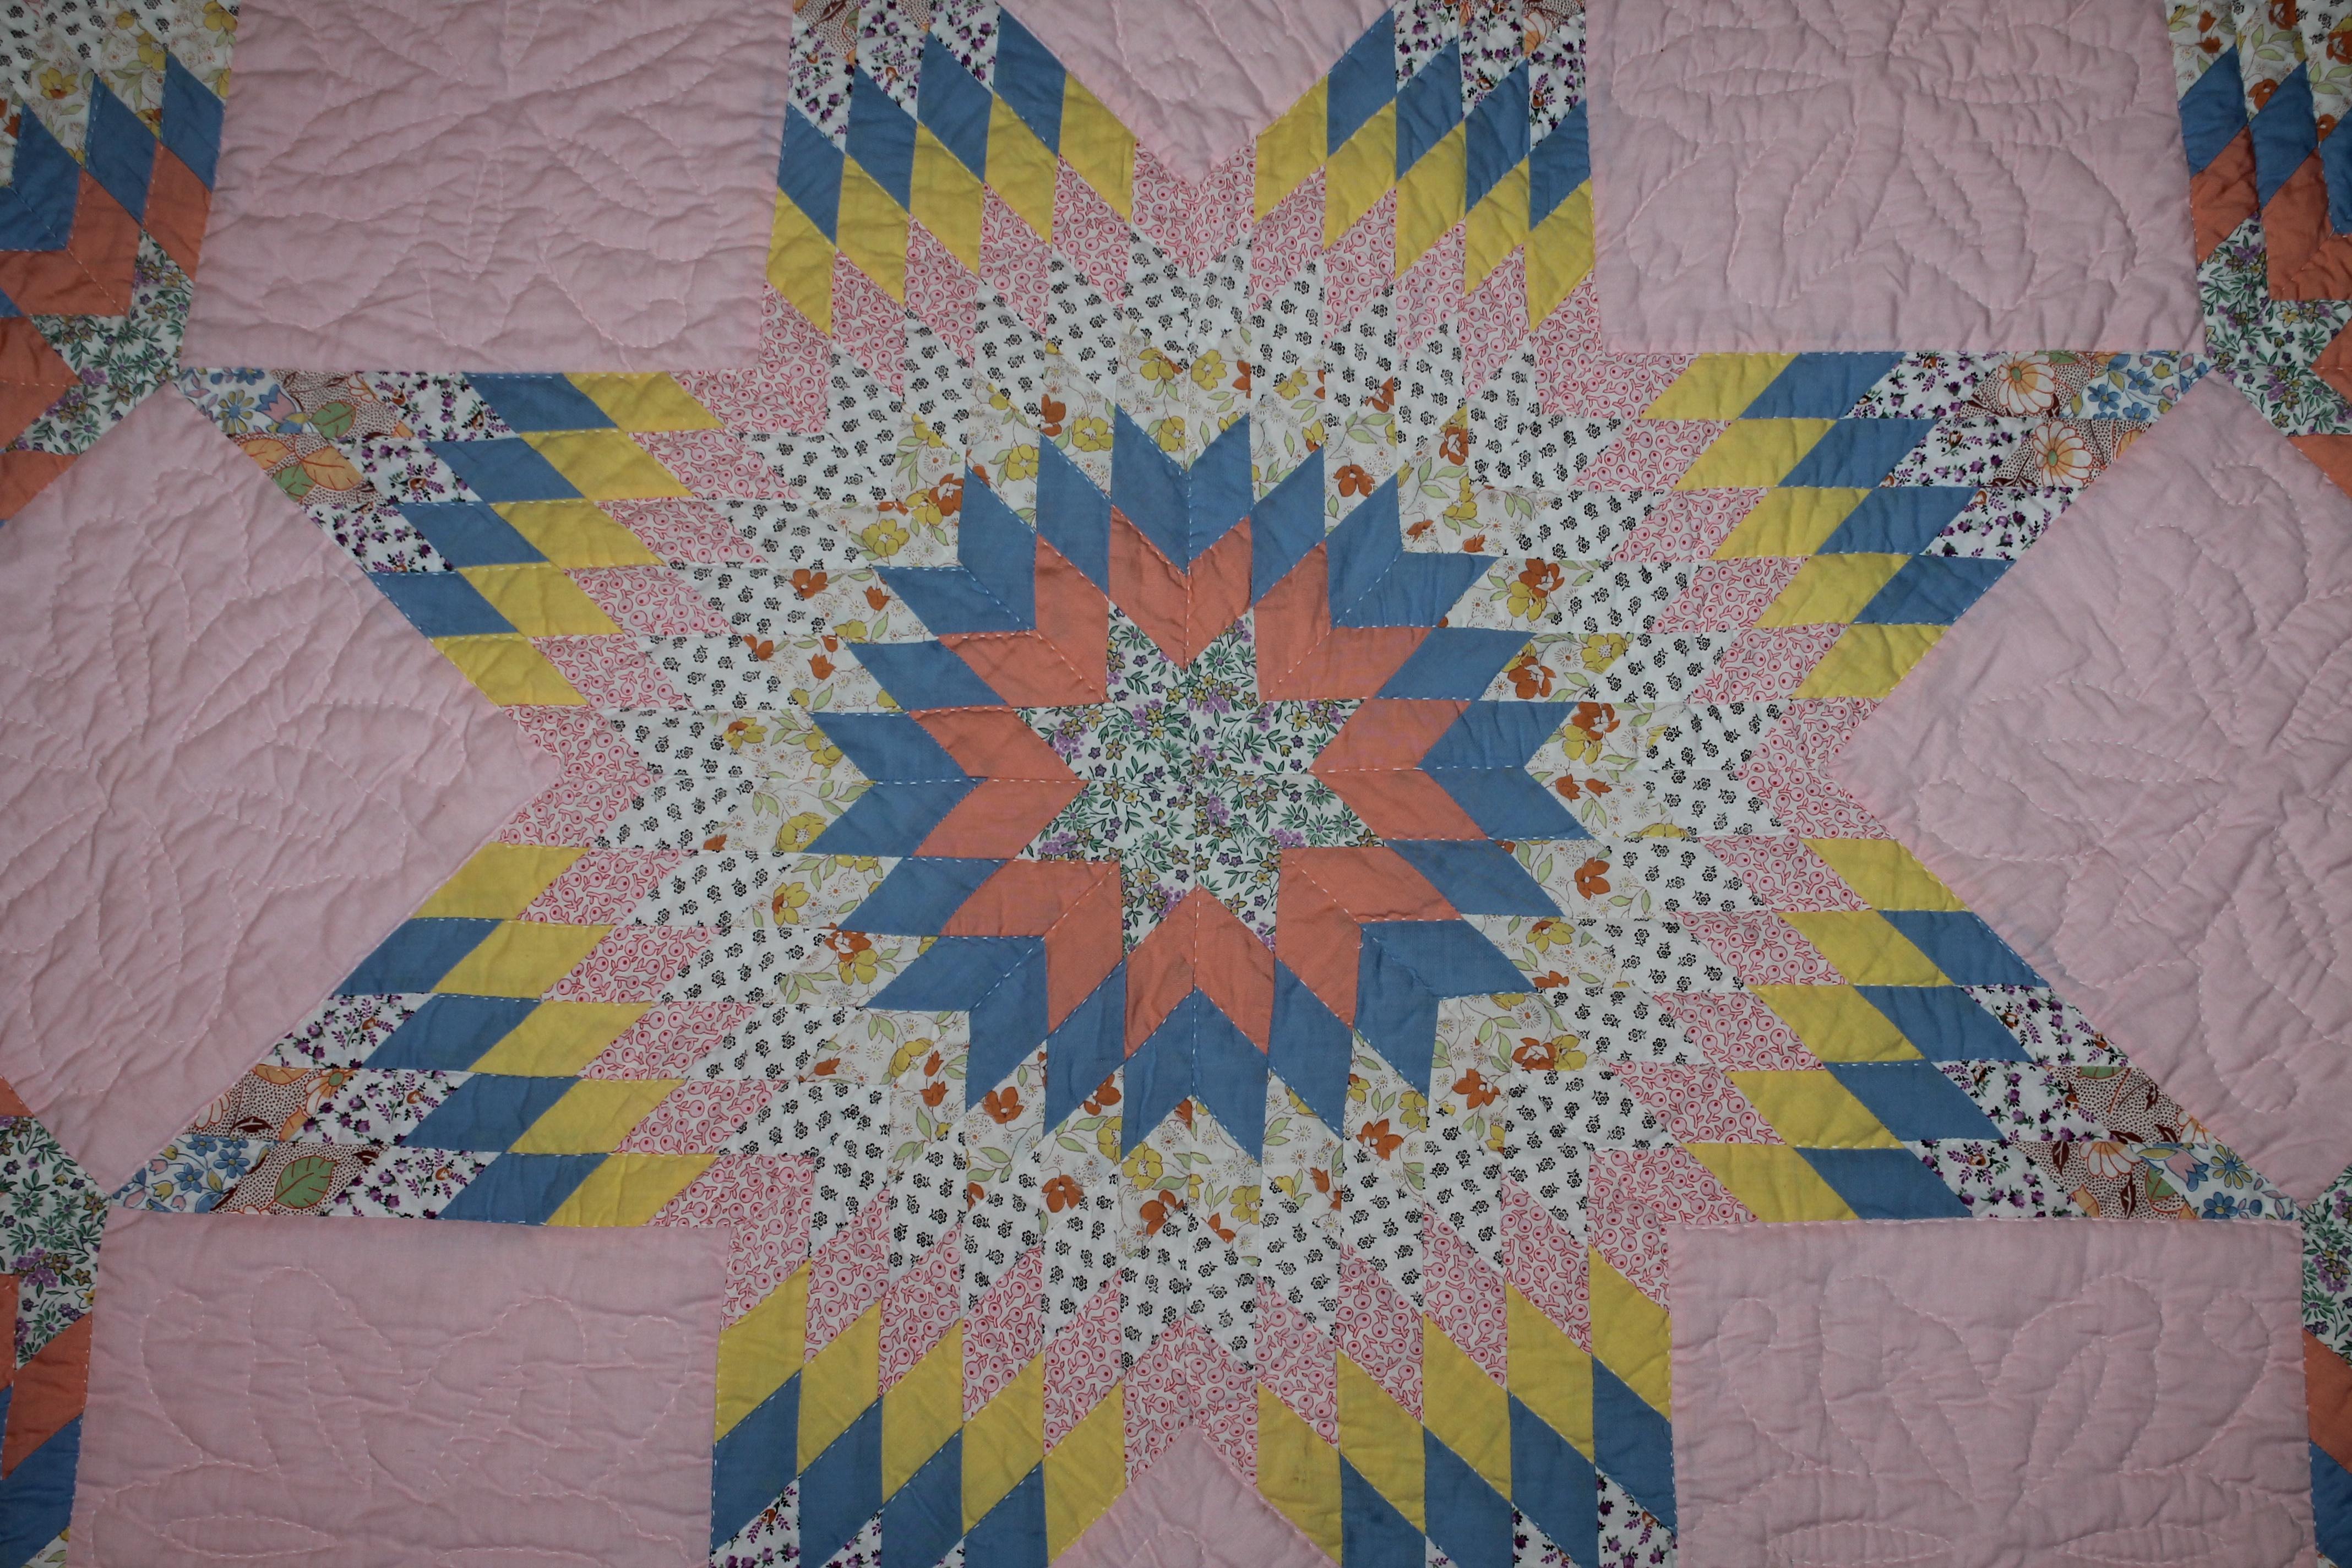 This fine mini piece work broken star quilt has nice quilting and in very good condition.